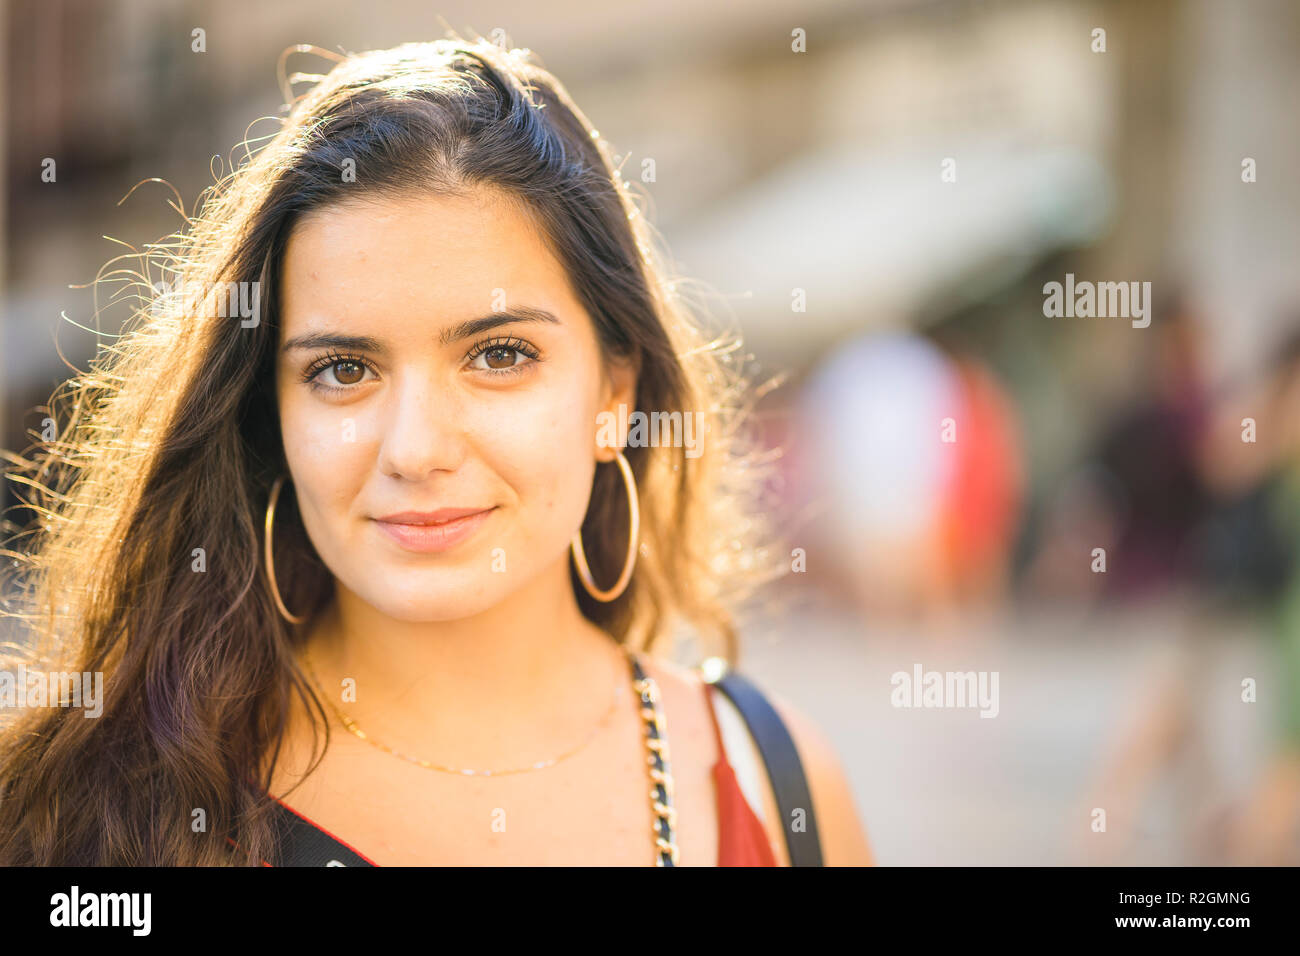 Portrait of young brunette teenager in sunny urban setting Stock Photo